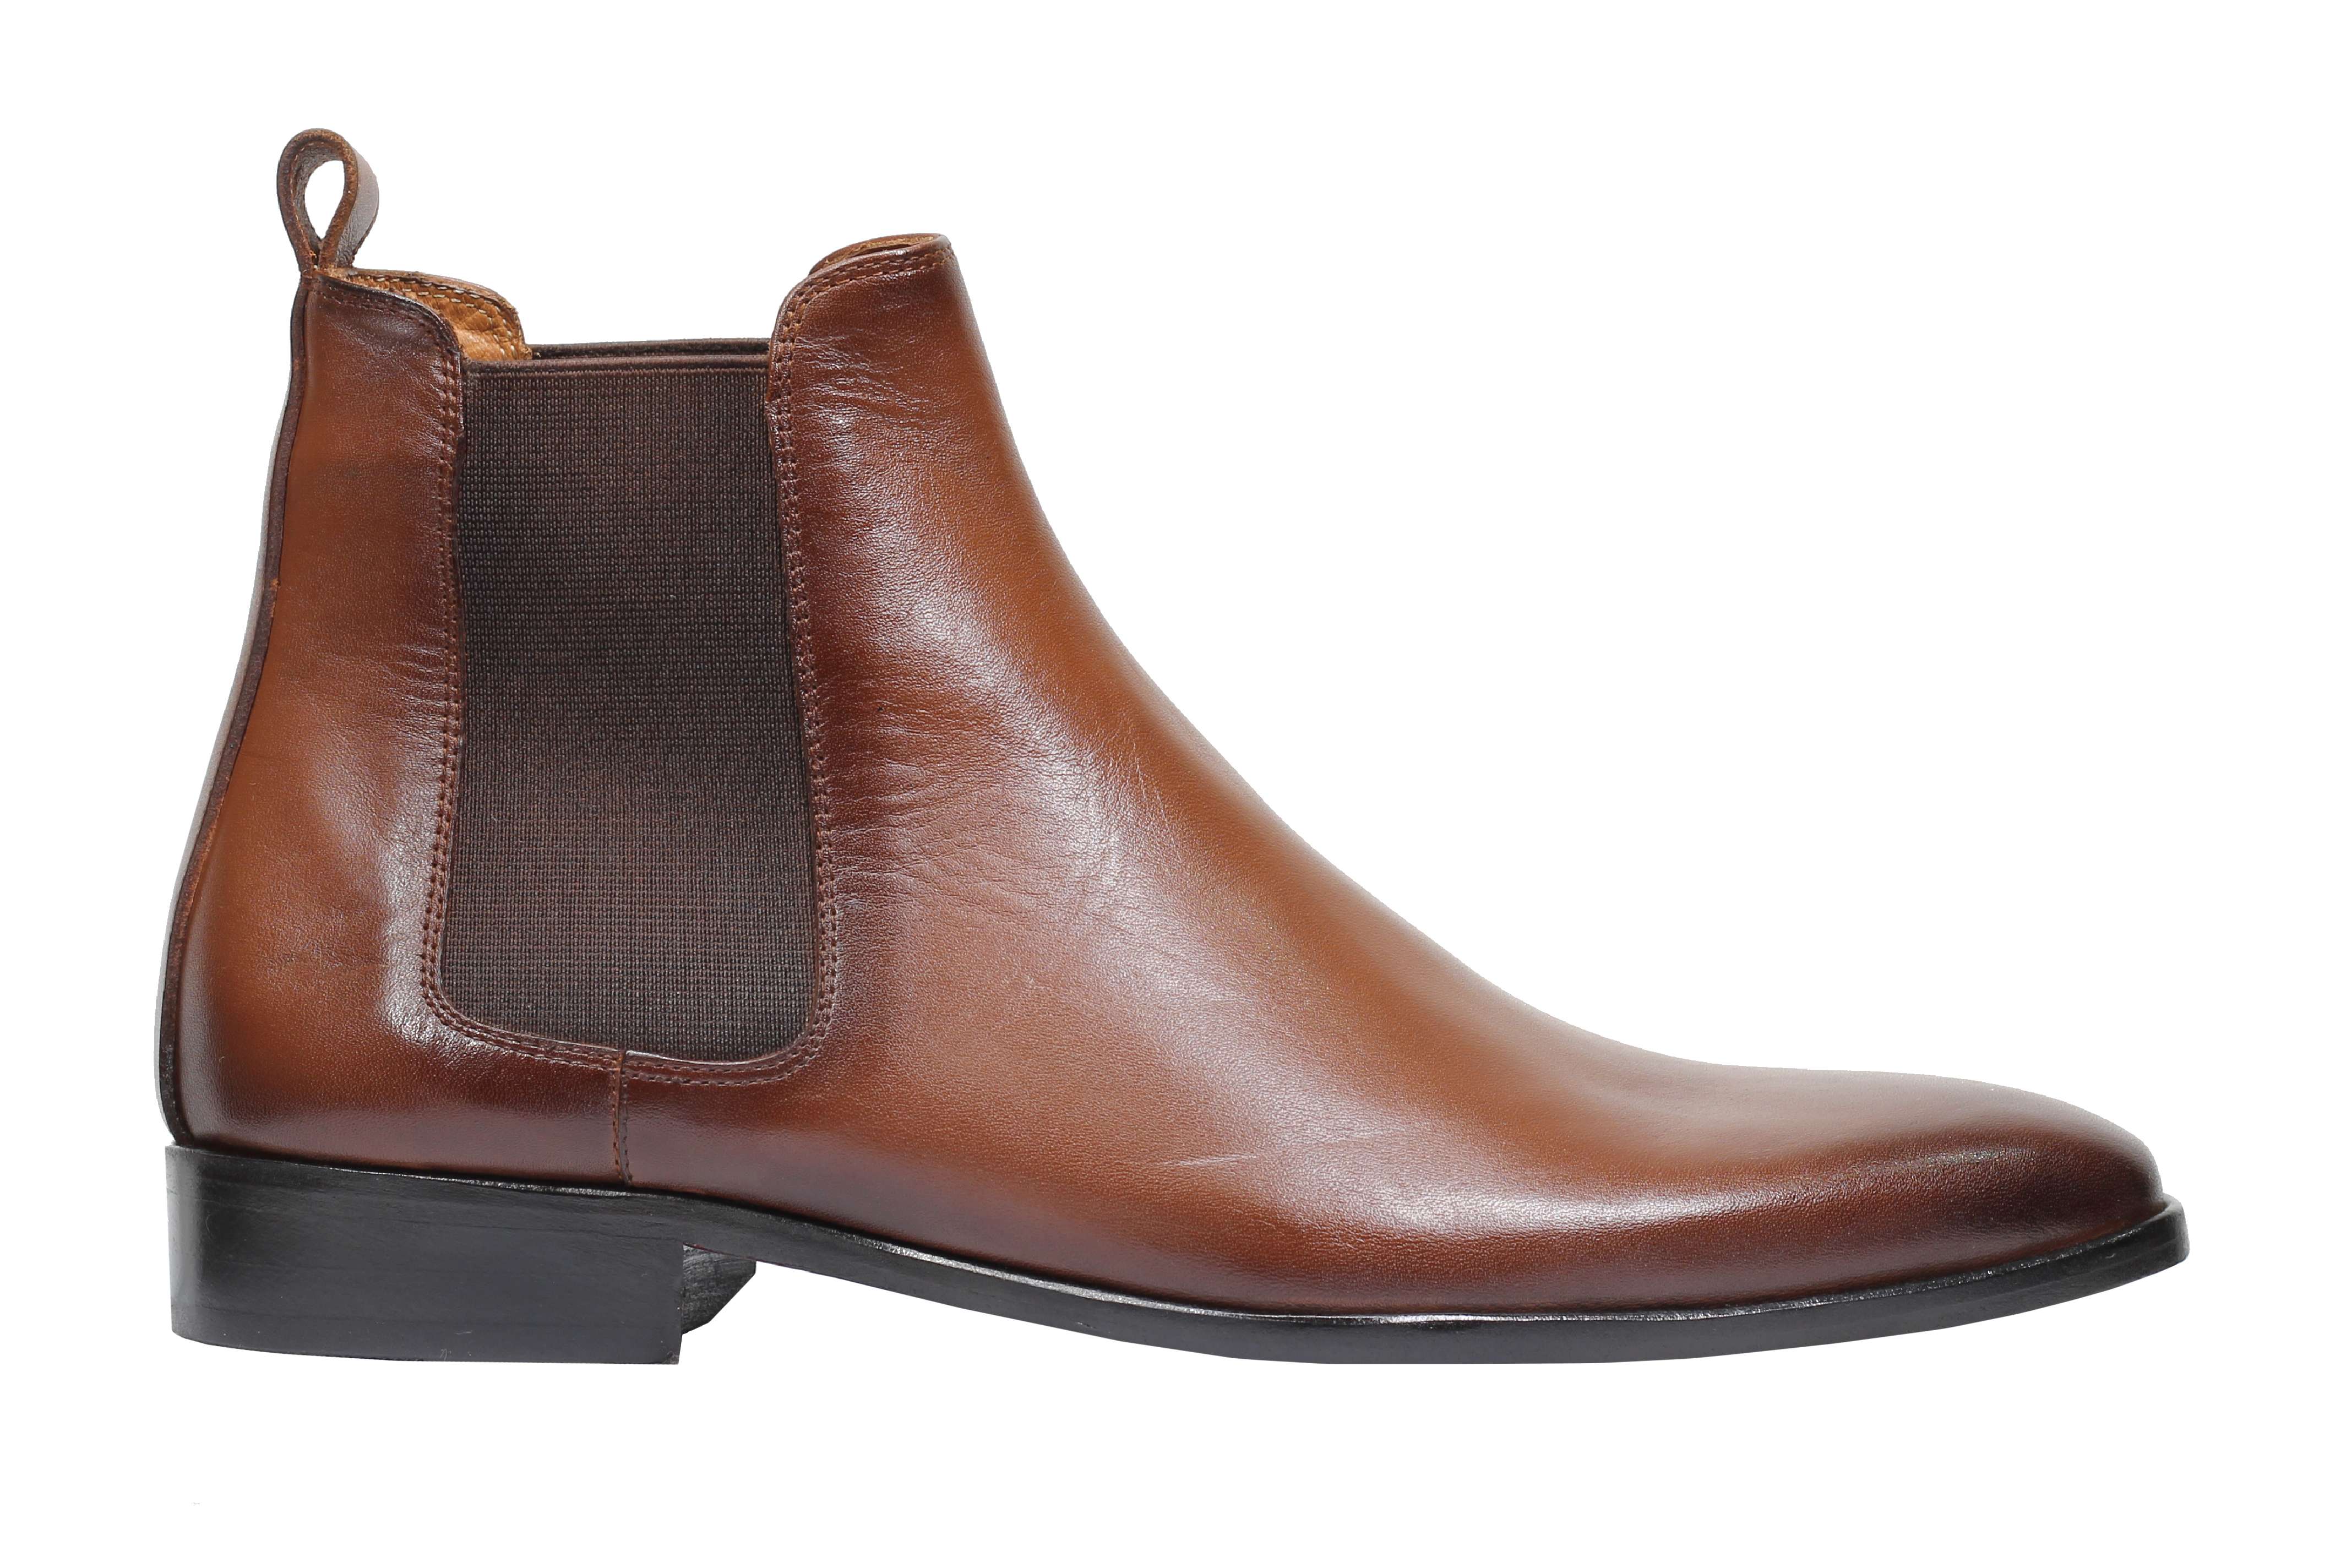 TAN CALF LEATHER CHELSEA BOOTS